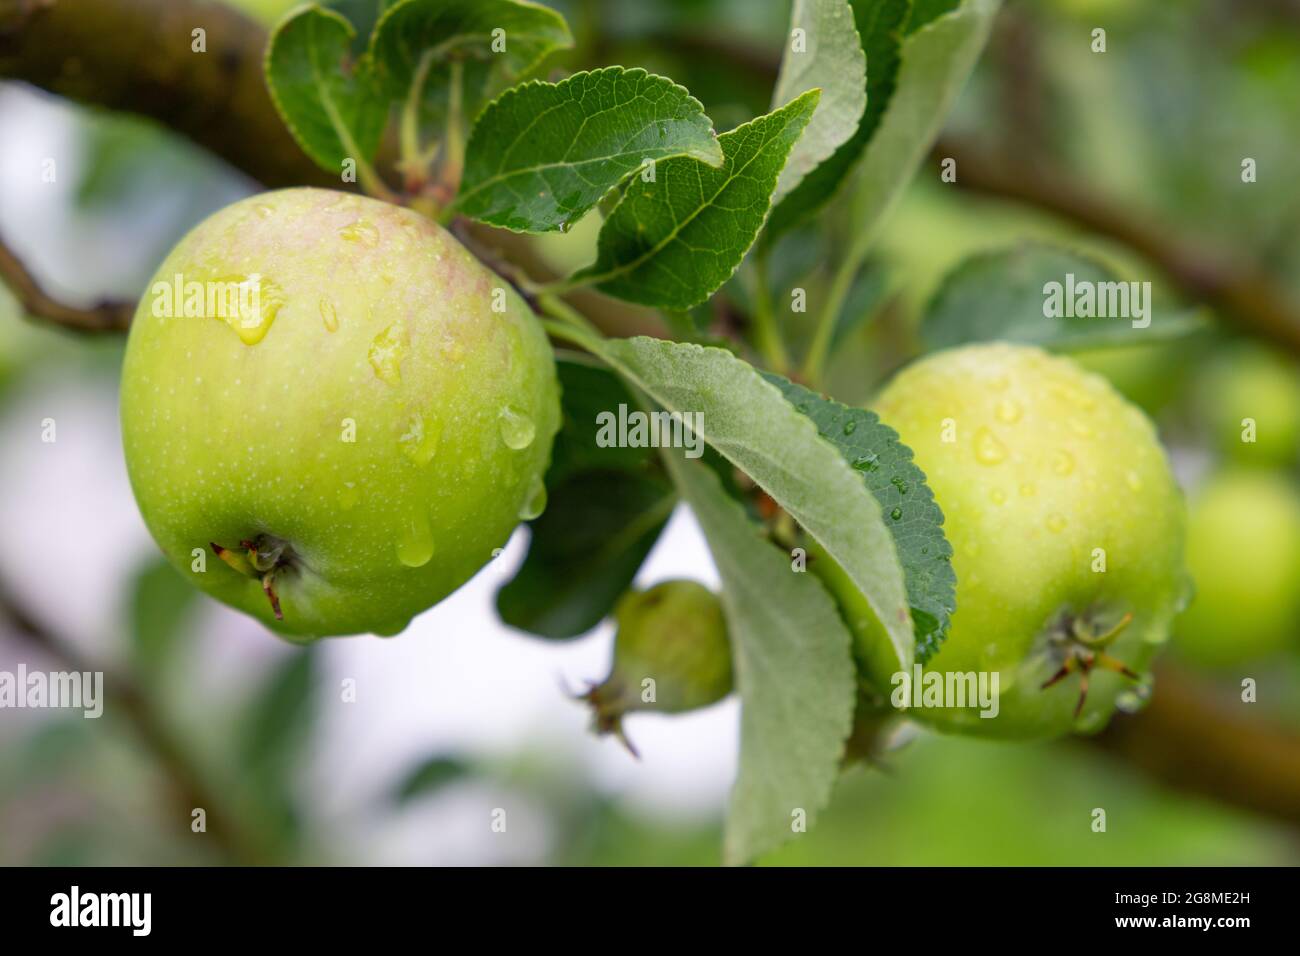 green apple with raindrops on an apple tree, focus on left side Stock Photo